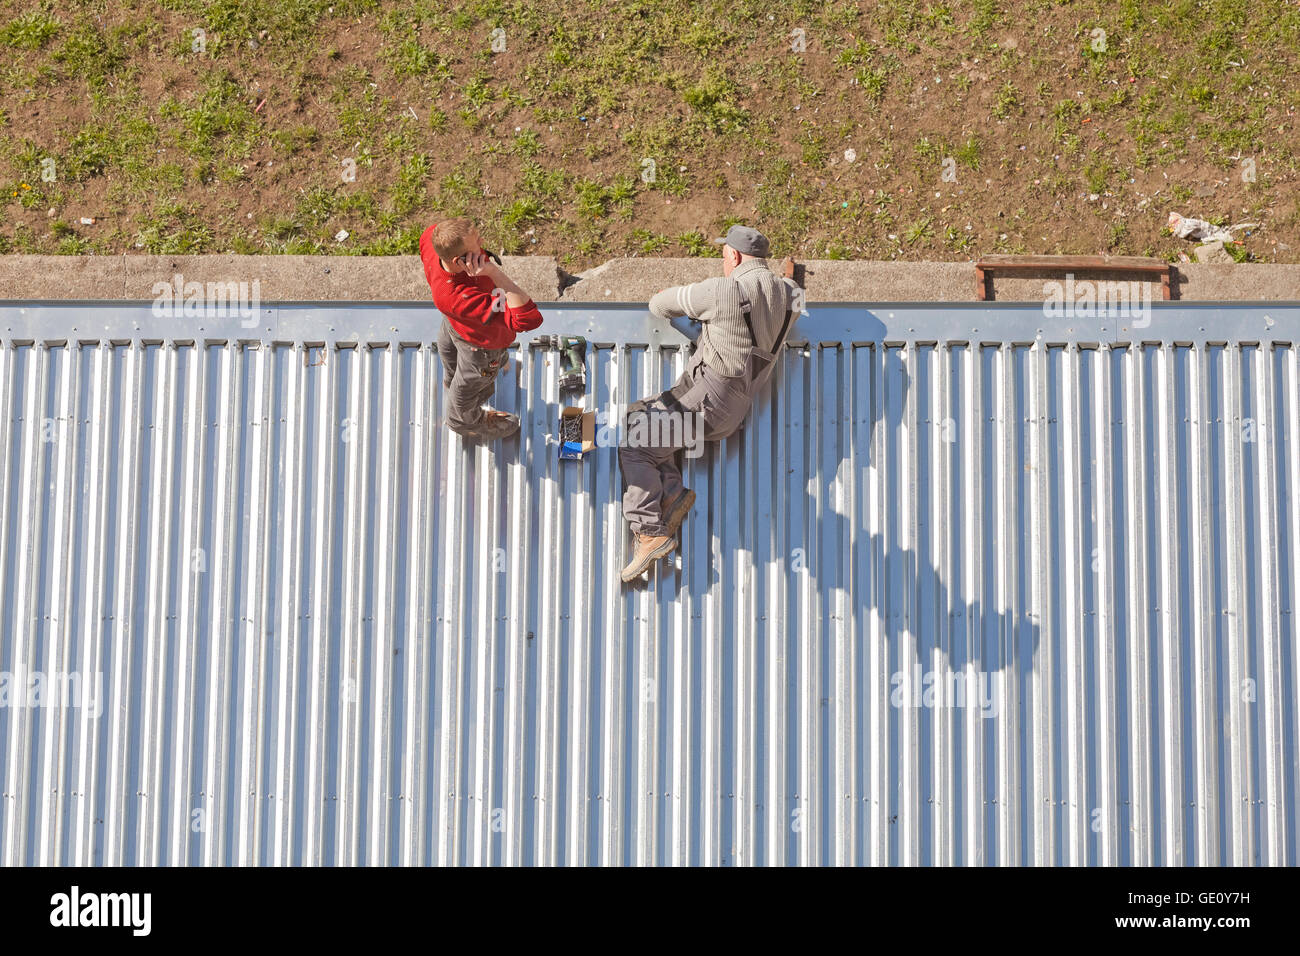 Szczecin, Poland - April 07, 2016: Two men working on a store roof made of corrugated metal sheets, picture taken from above. Stock Photo